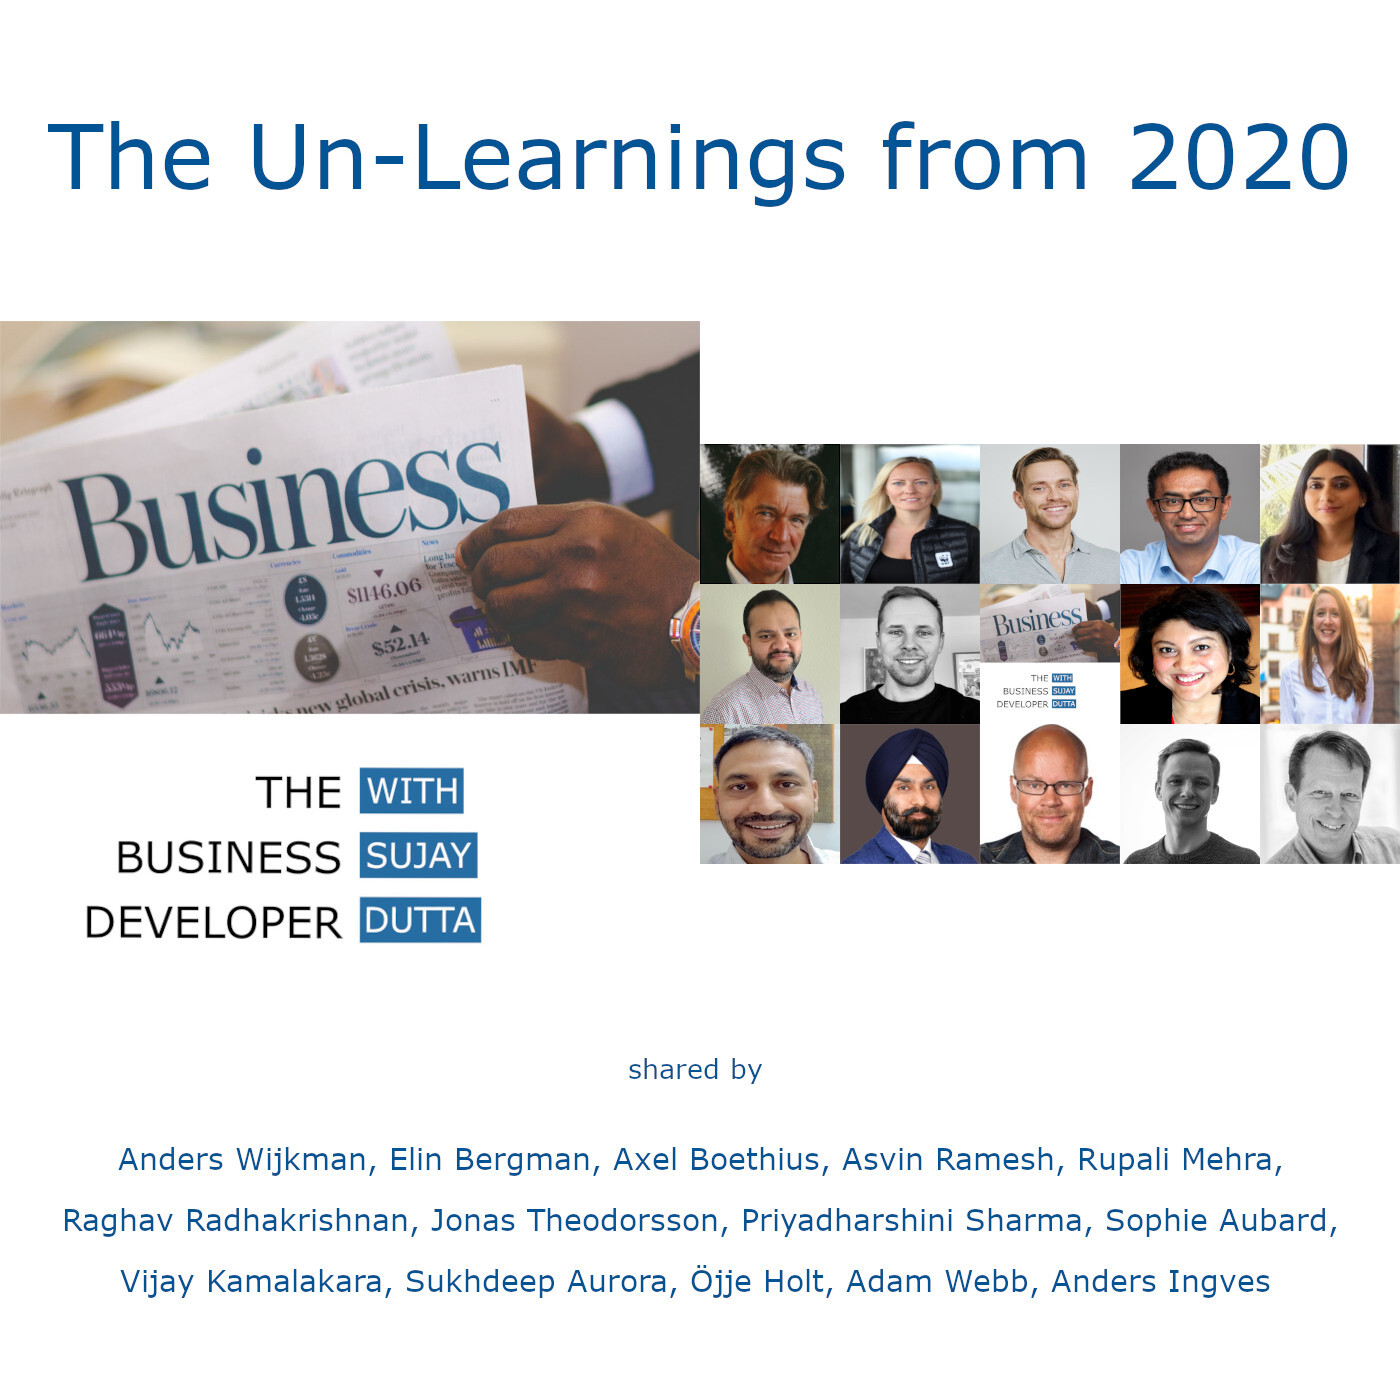 The Un-Learnings from 2020